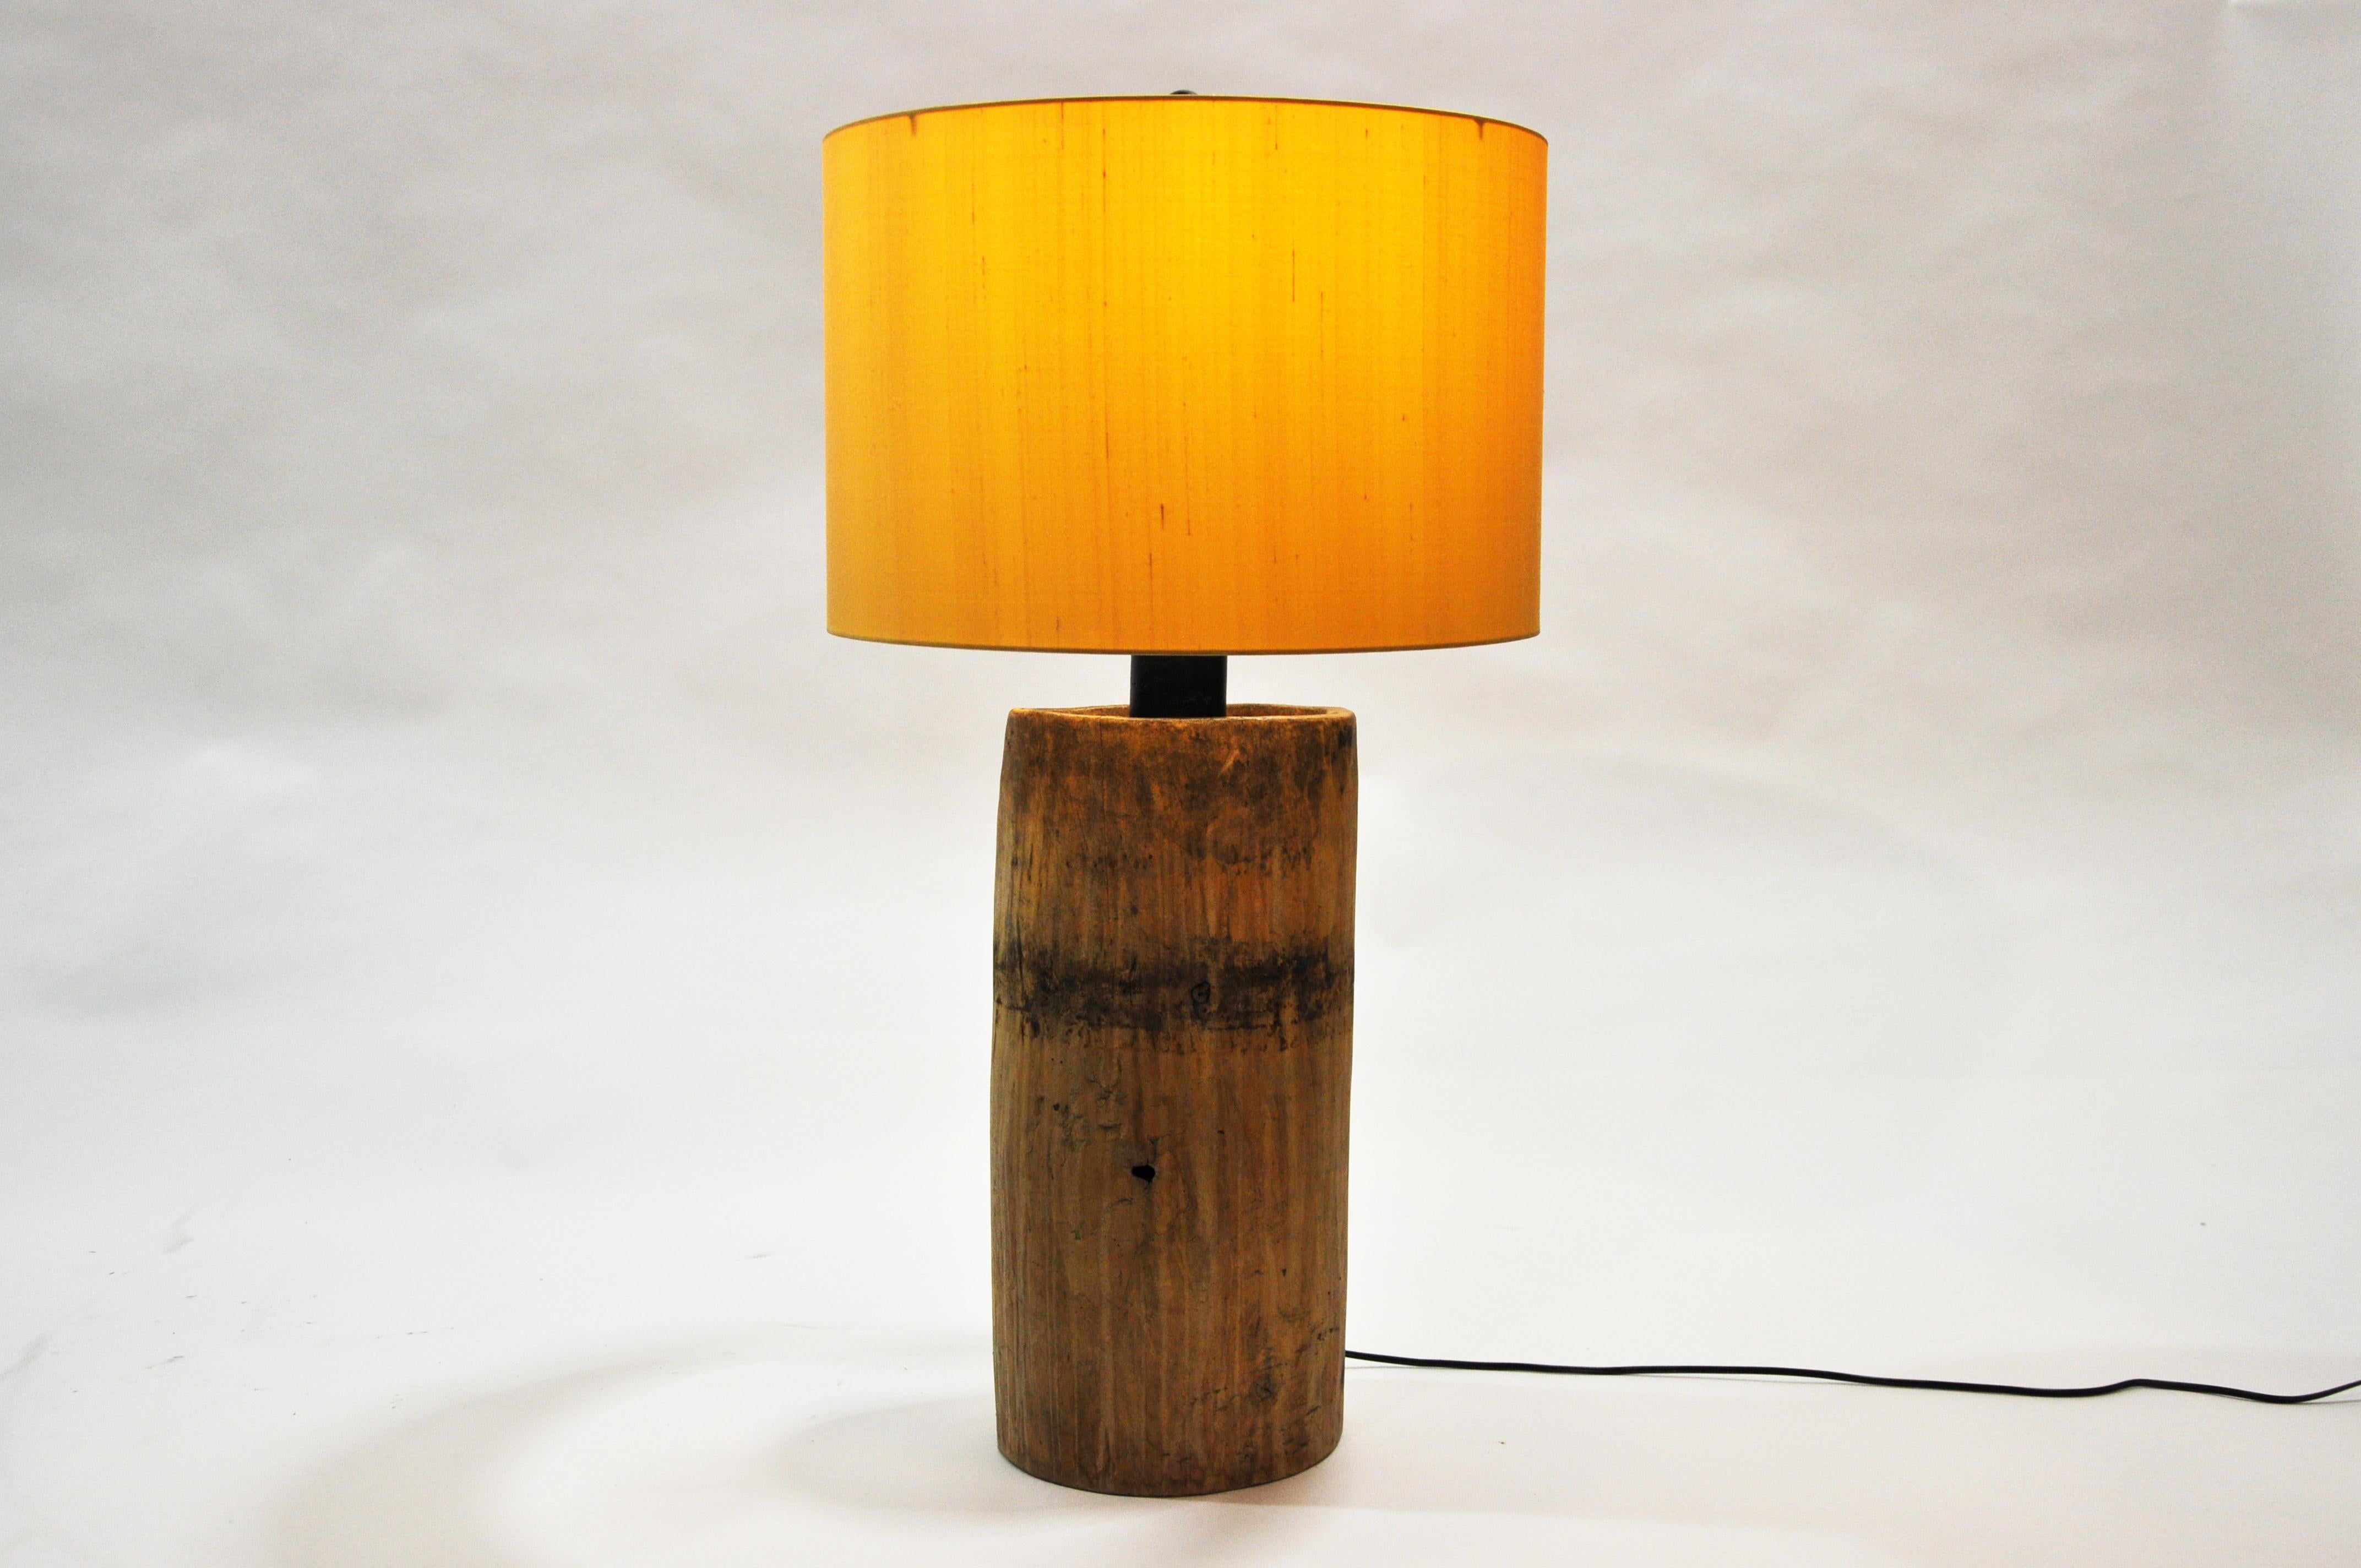 A custom table lamp from Thailand made from a vintage teak wood cylinder.  The cylinder was originally used to hold grain. Our Chicago workshop made the conversion, adding custom wiring and other parts.  The piece is rustic but has an interesting